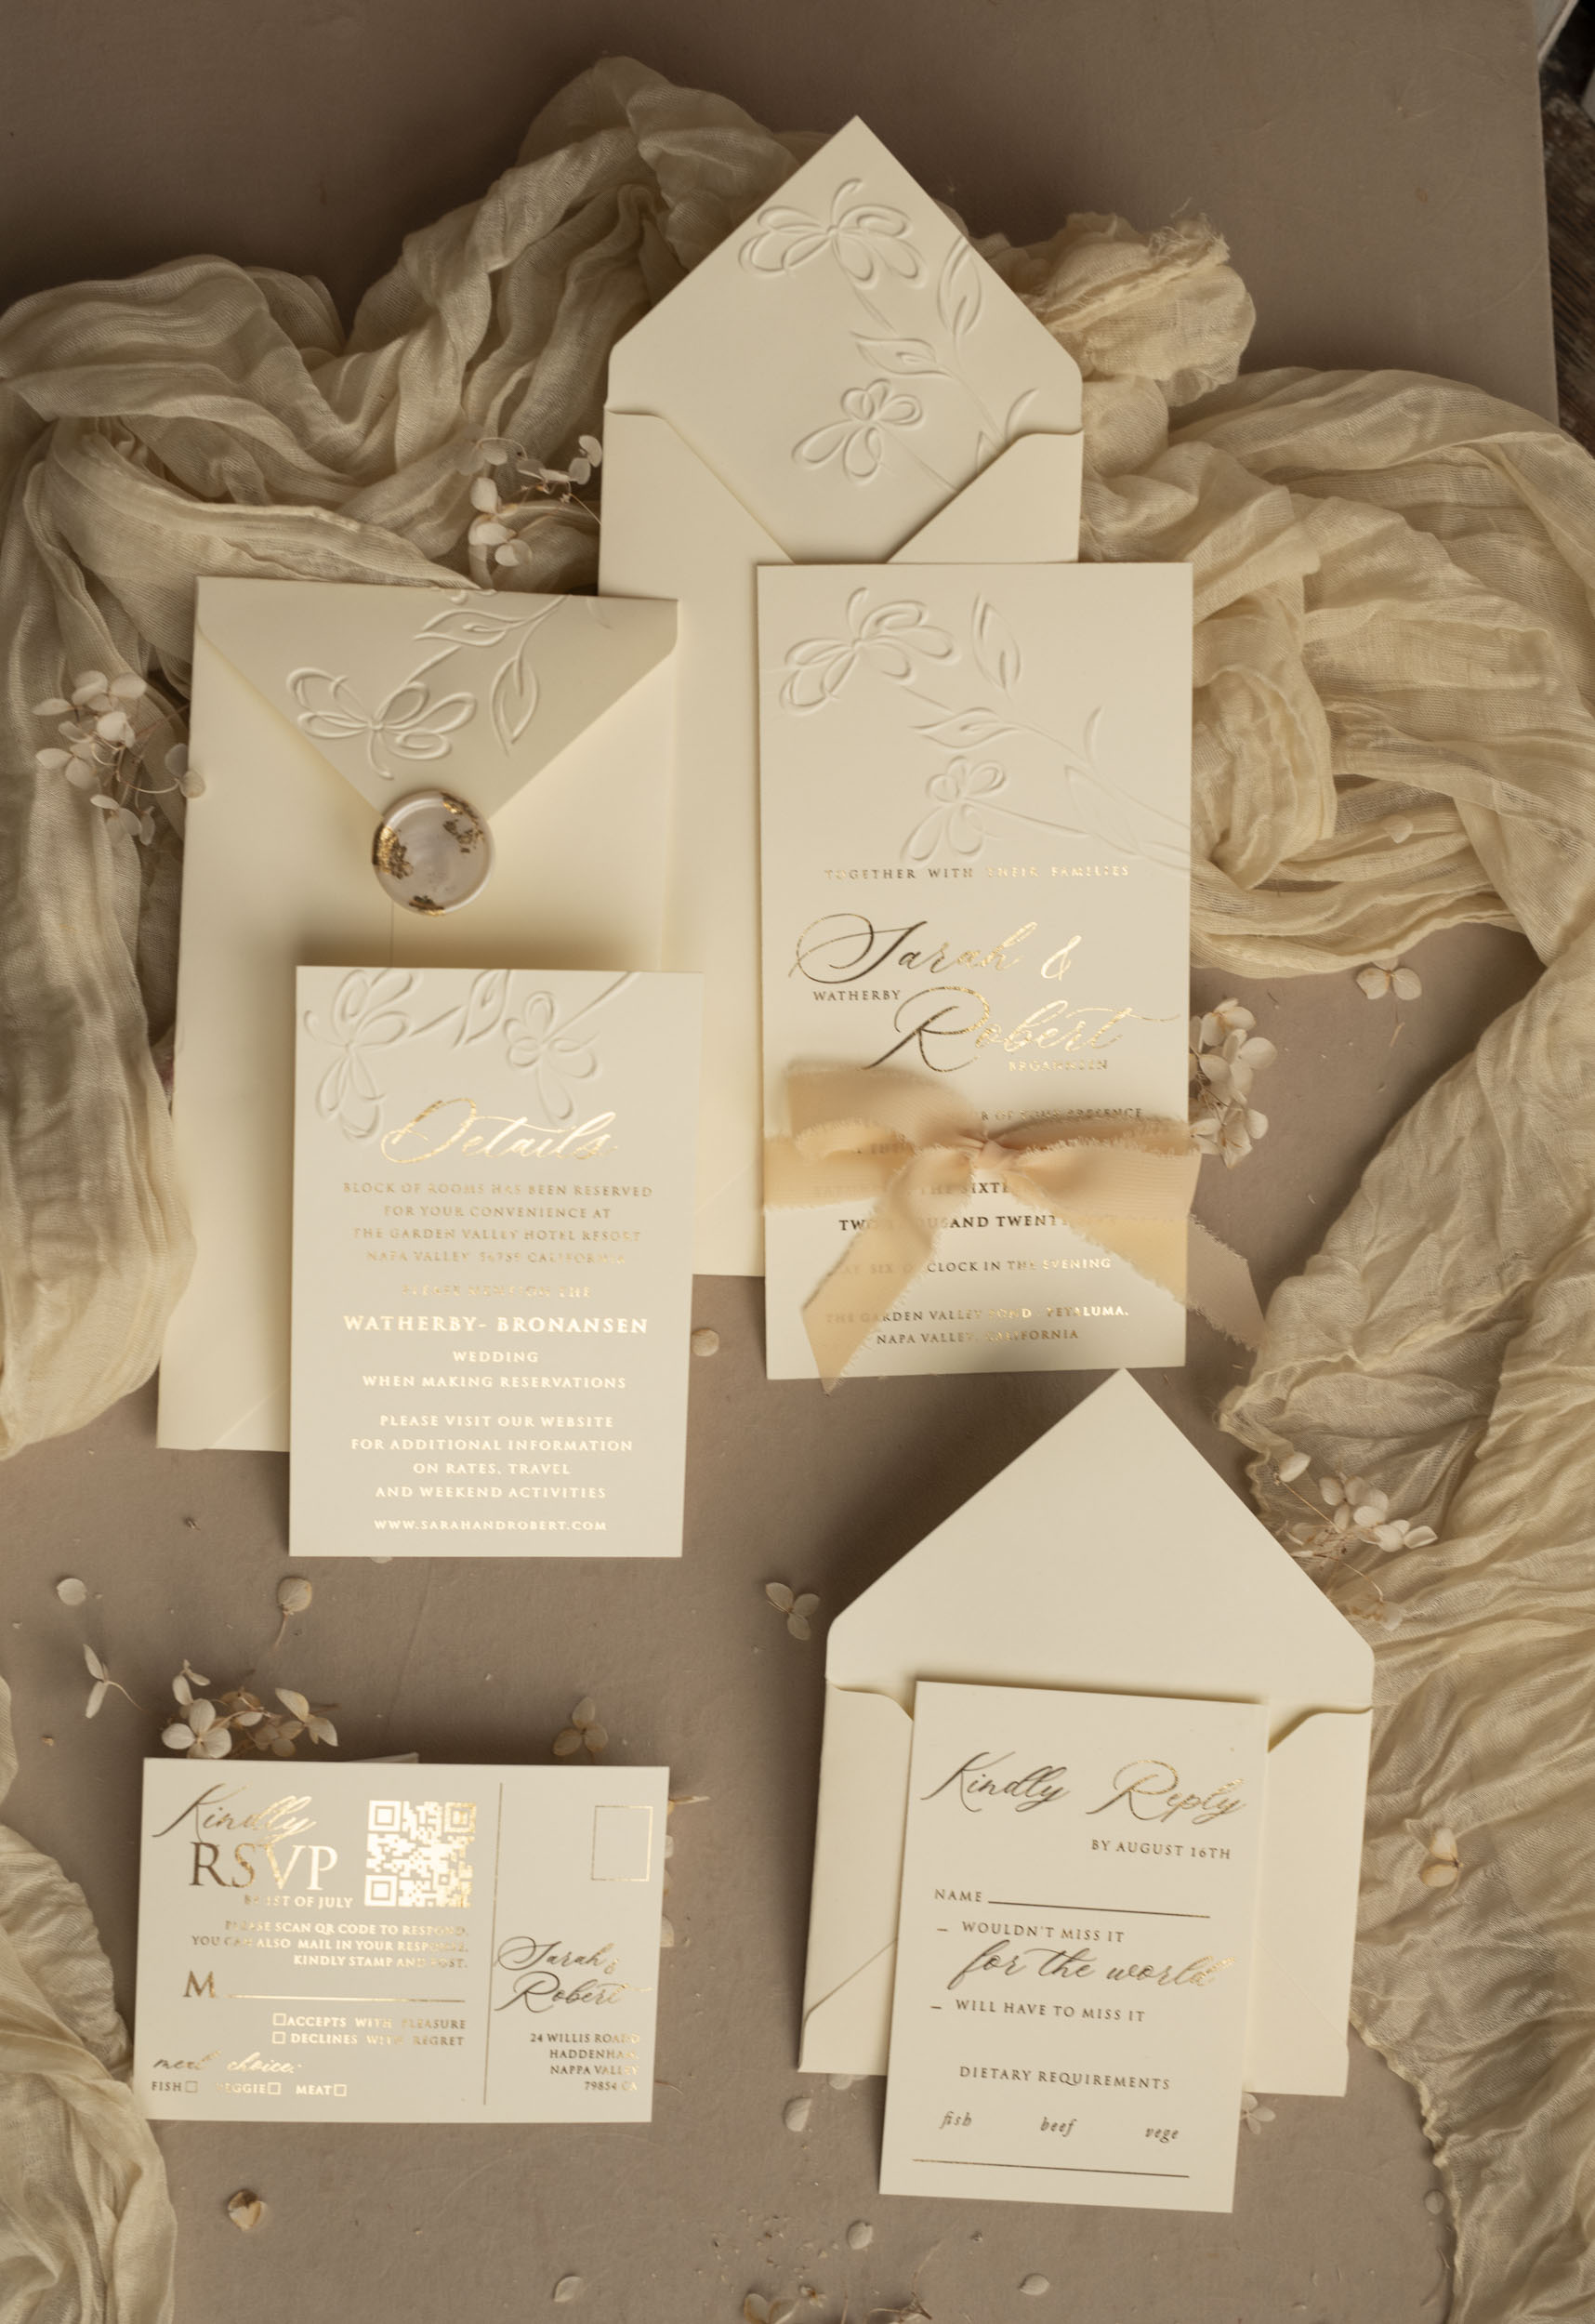 Elegant Simplicity: White & Gold Engraved Wedding Invitations with Beige Ribbon and Floral Patterns